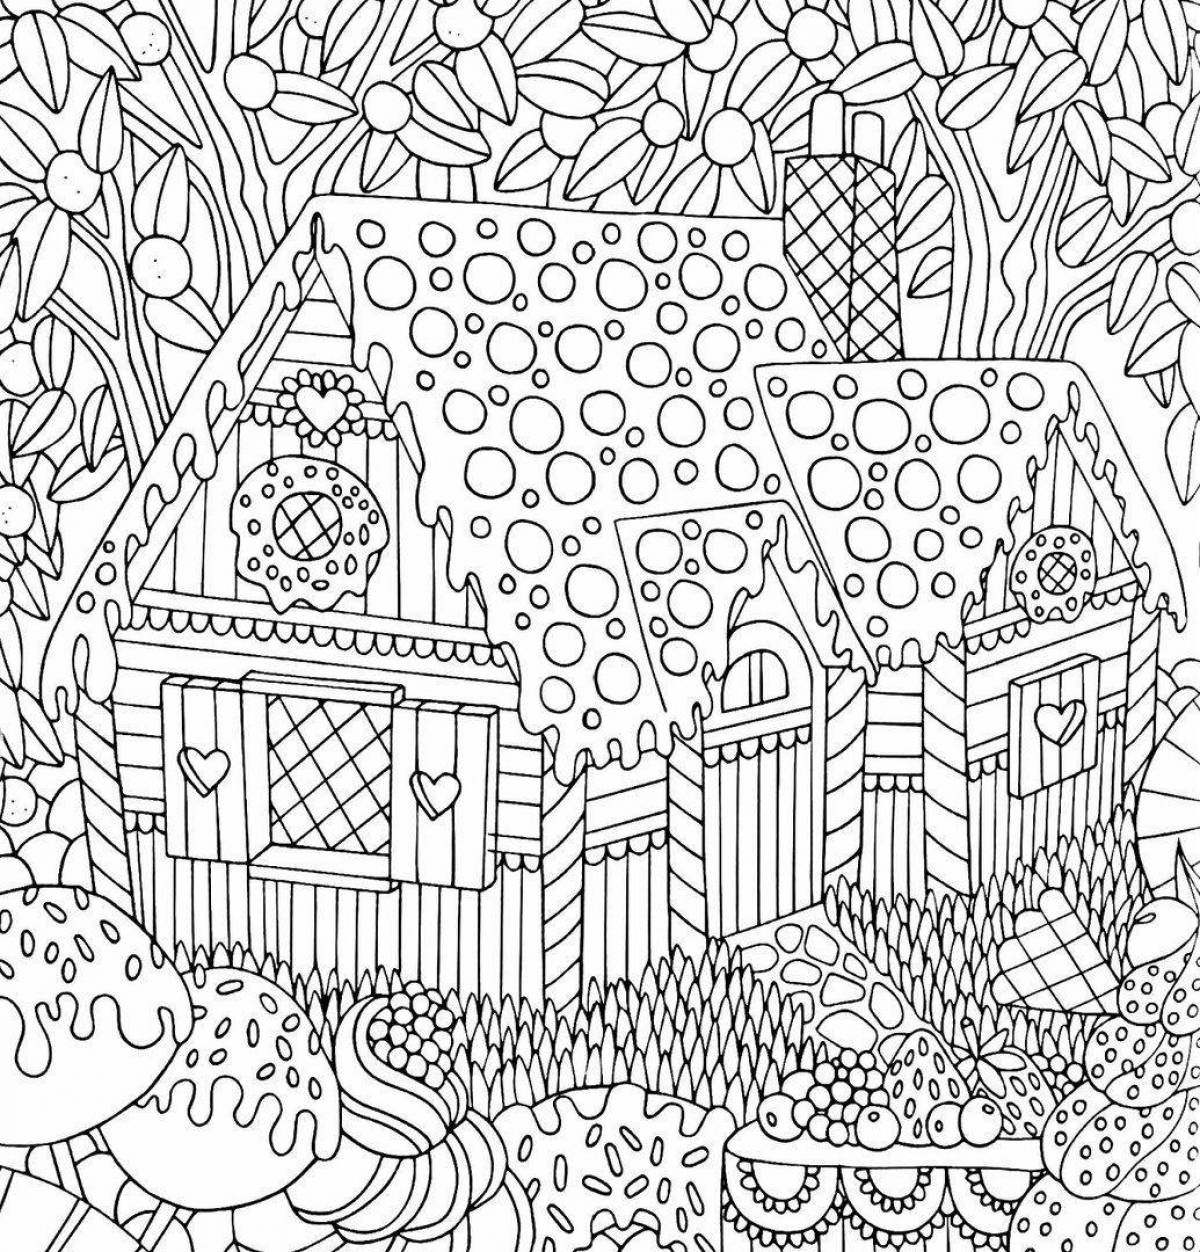 Intriguing adult coloring book